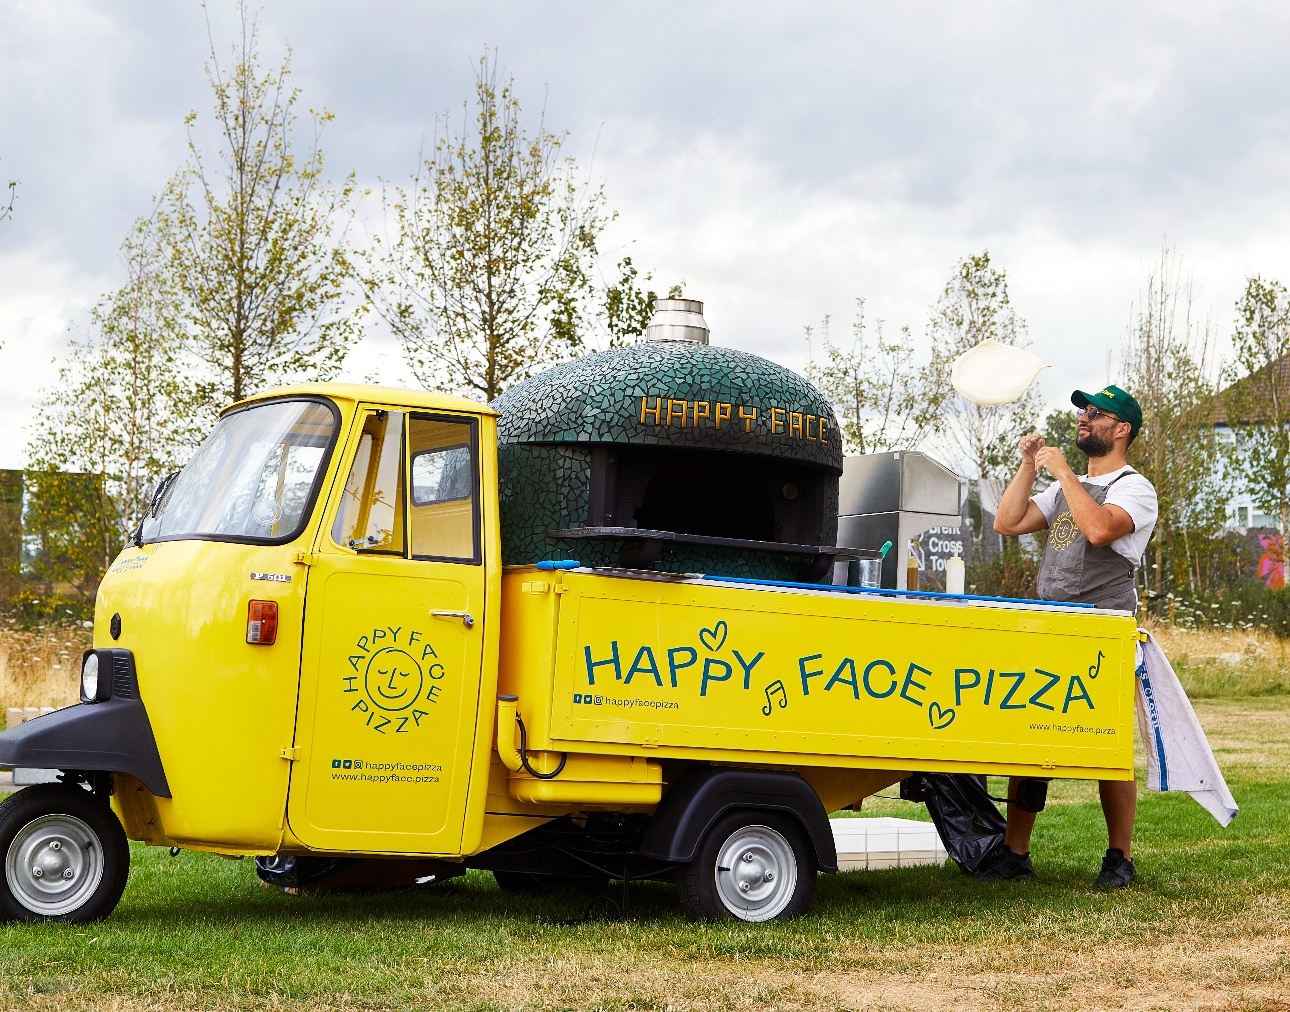 man tossing a pizza base in the air next to a pizza truck bright yellow in colour